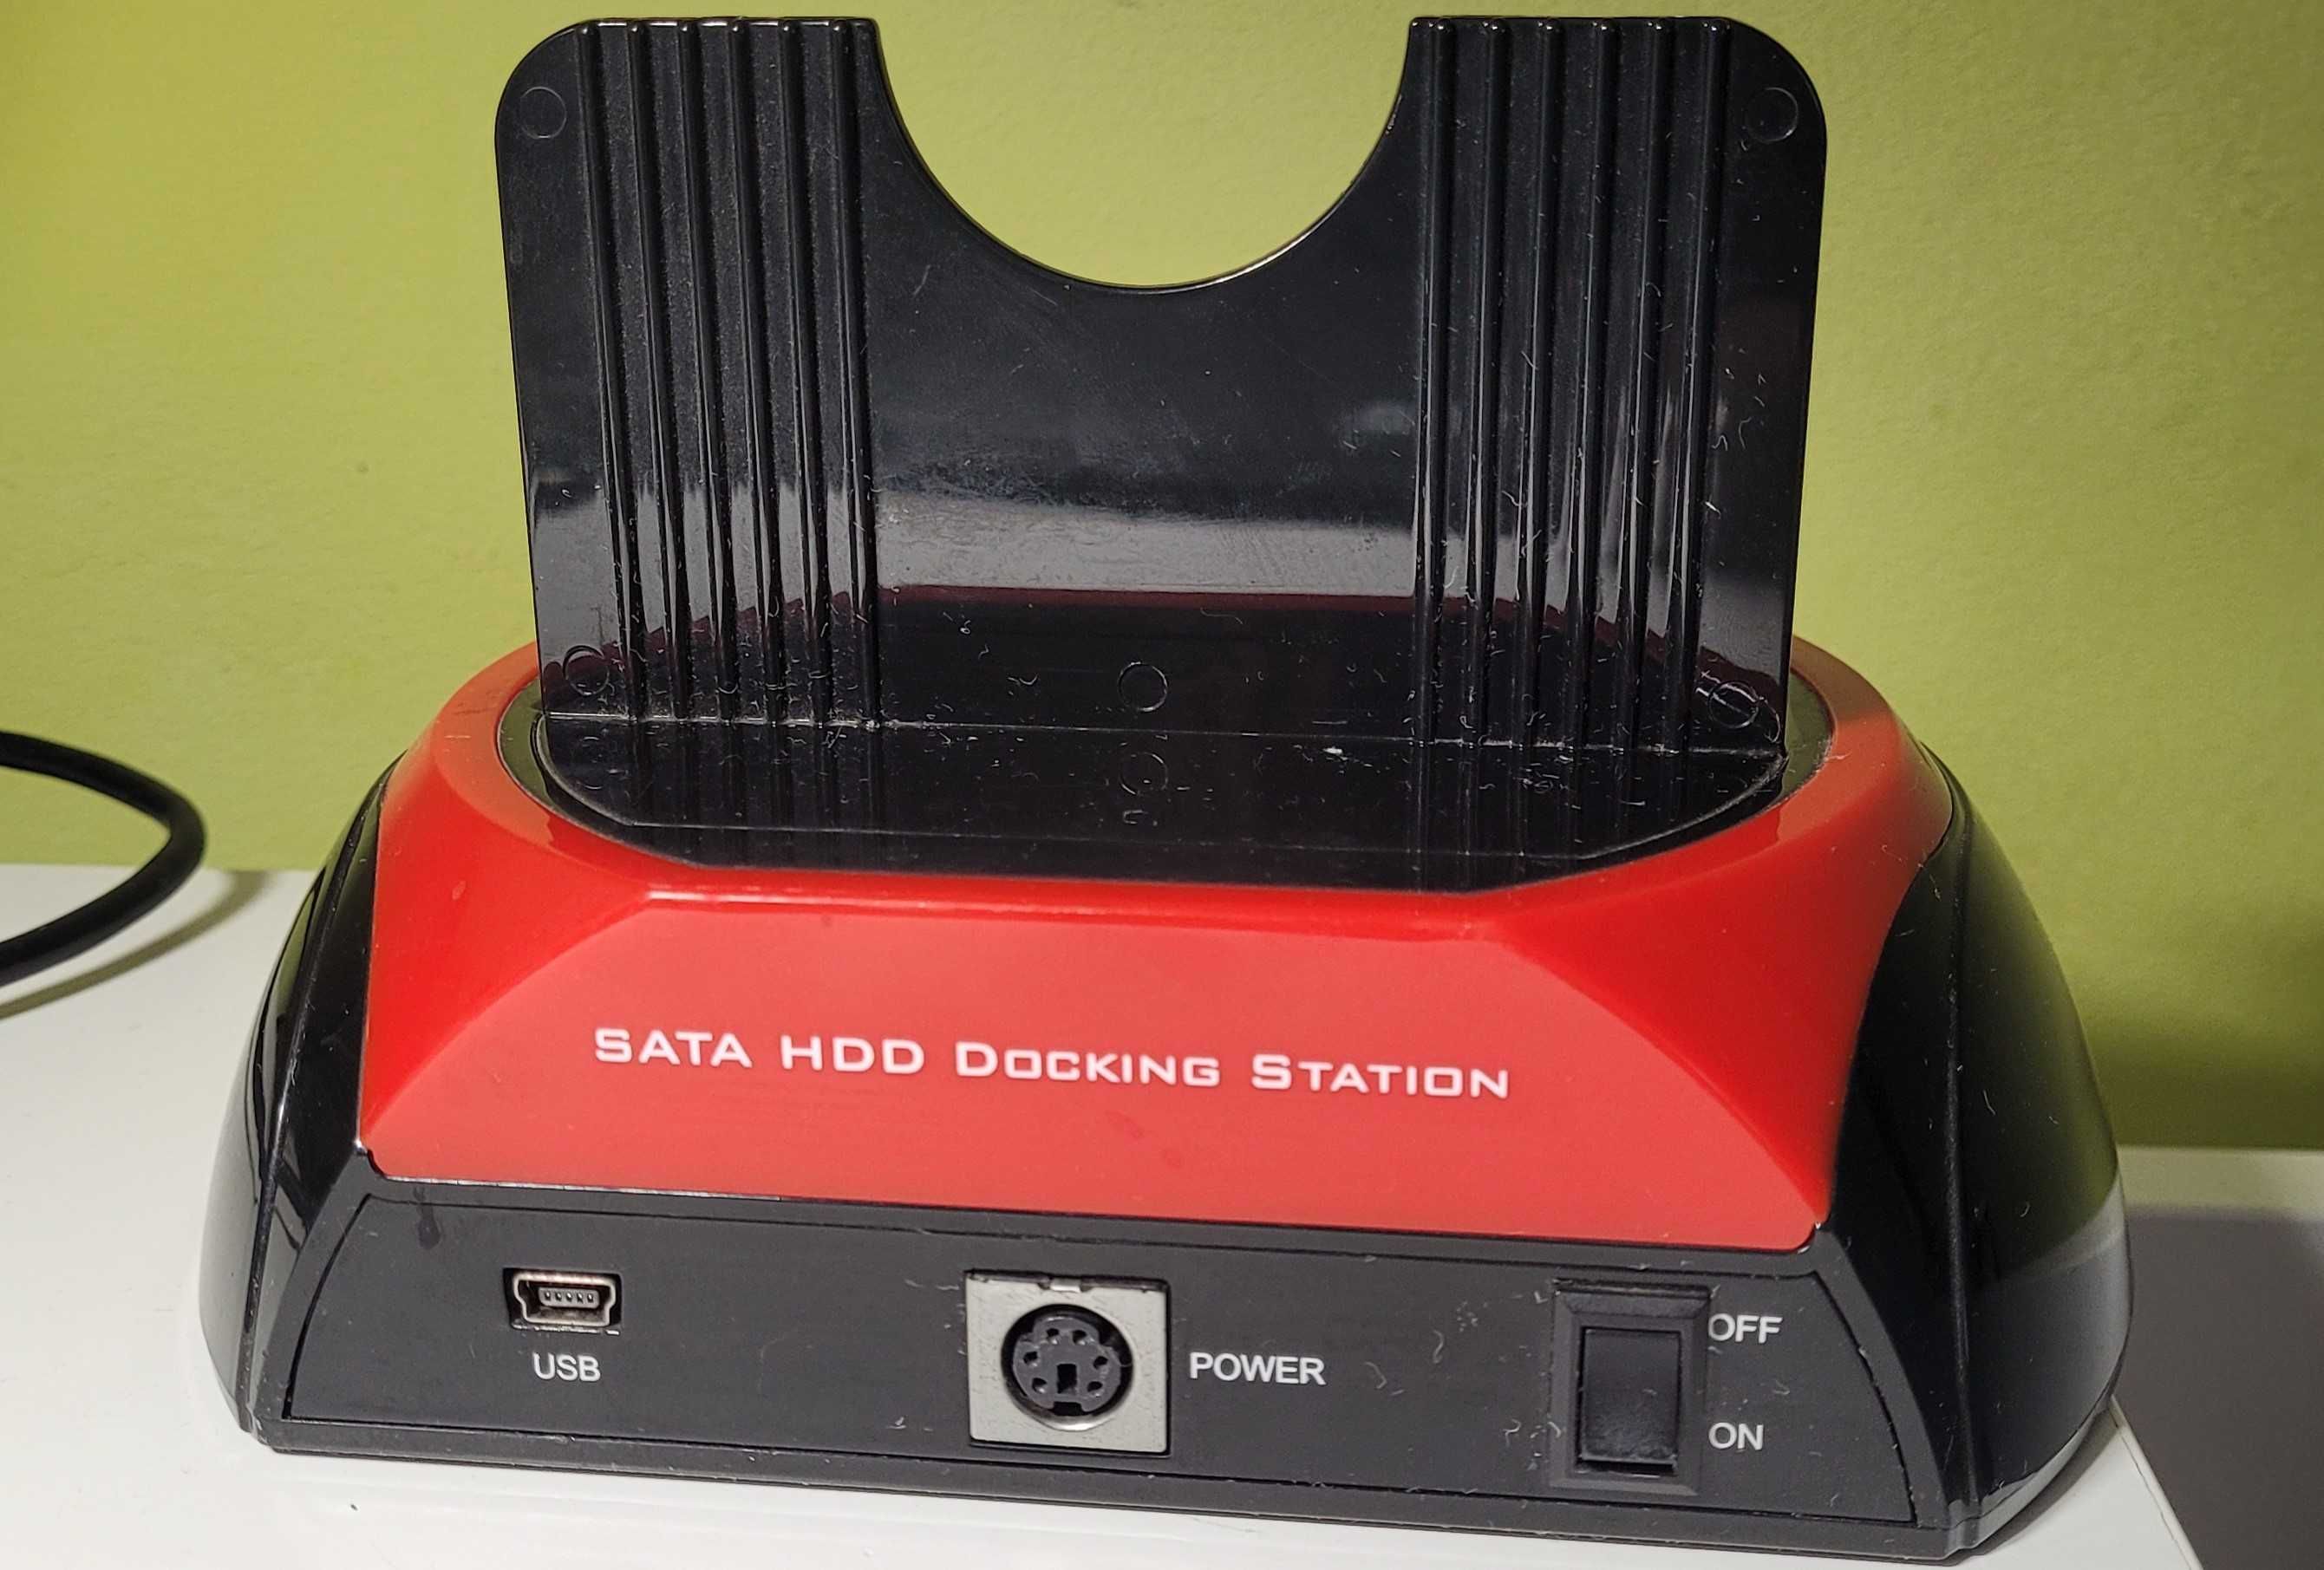 All-in-One SATA HDD Docking Station